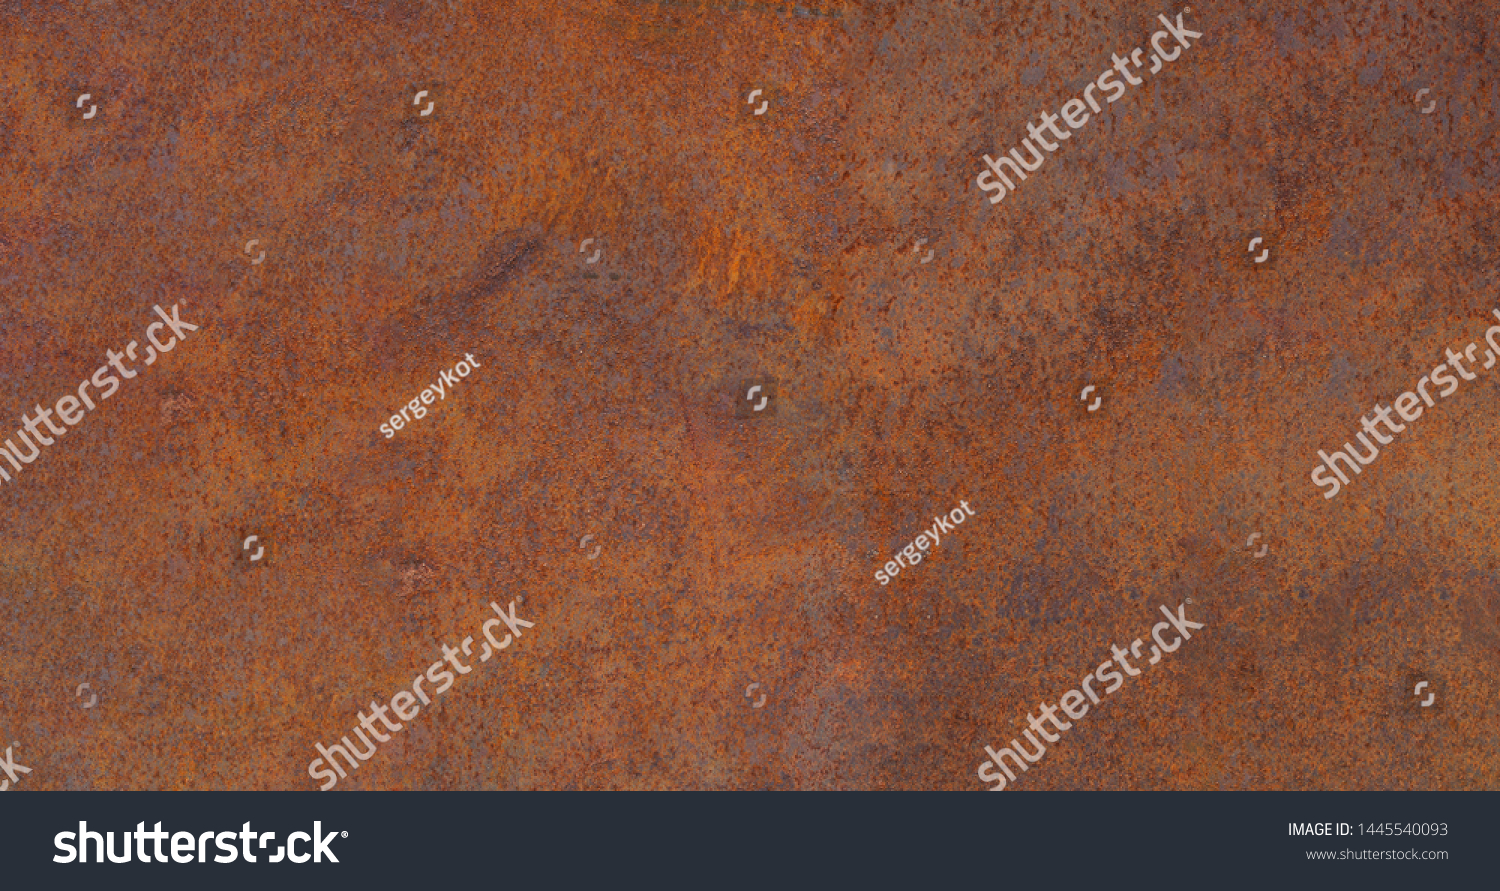 Panoramic grunge rusted metal texture, rust and oxidized metal background. Old metal iron panel. High quality #1445540093